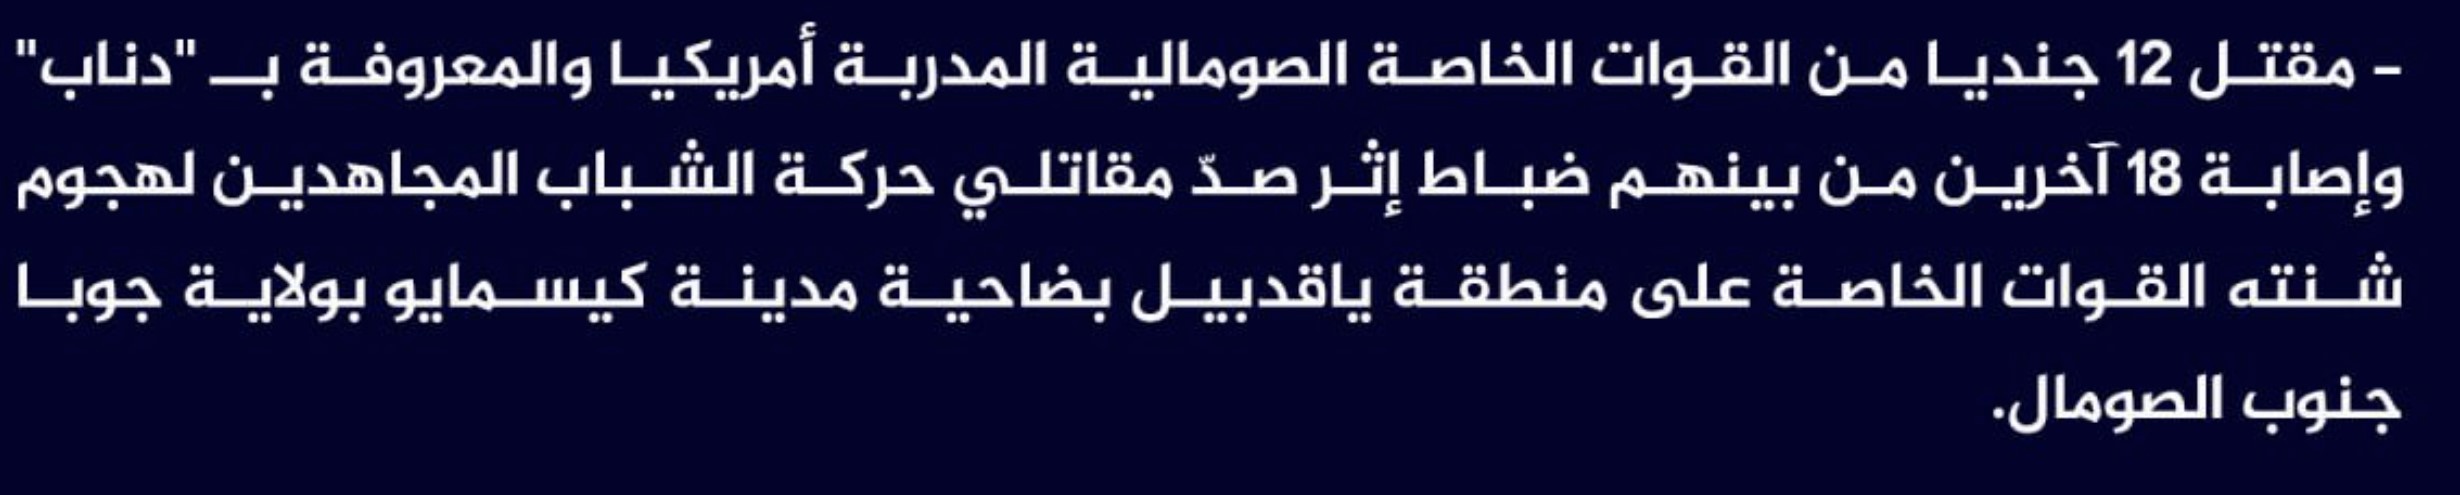 (Claim) al-Shabaab Killed Twelve Danab Soldiers and Injured Eighteen Others, Including an Officer, While Repelling an Attack in "Yaqdabil" District, Kismayo City, Juba State, South Somalia - 20 June 2023